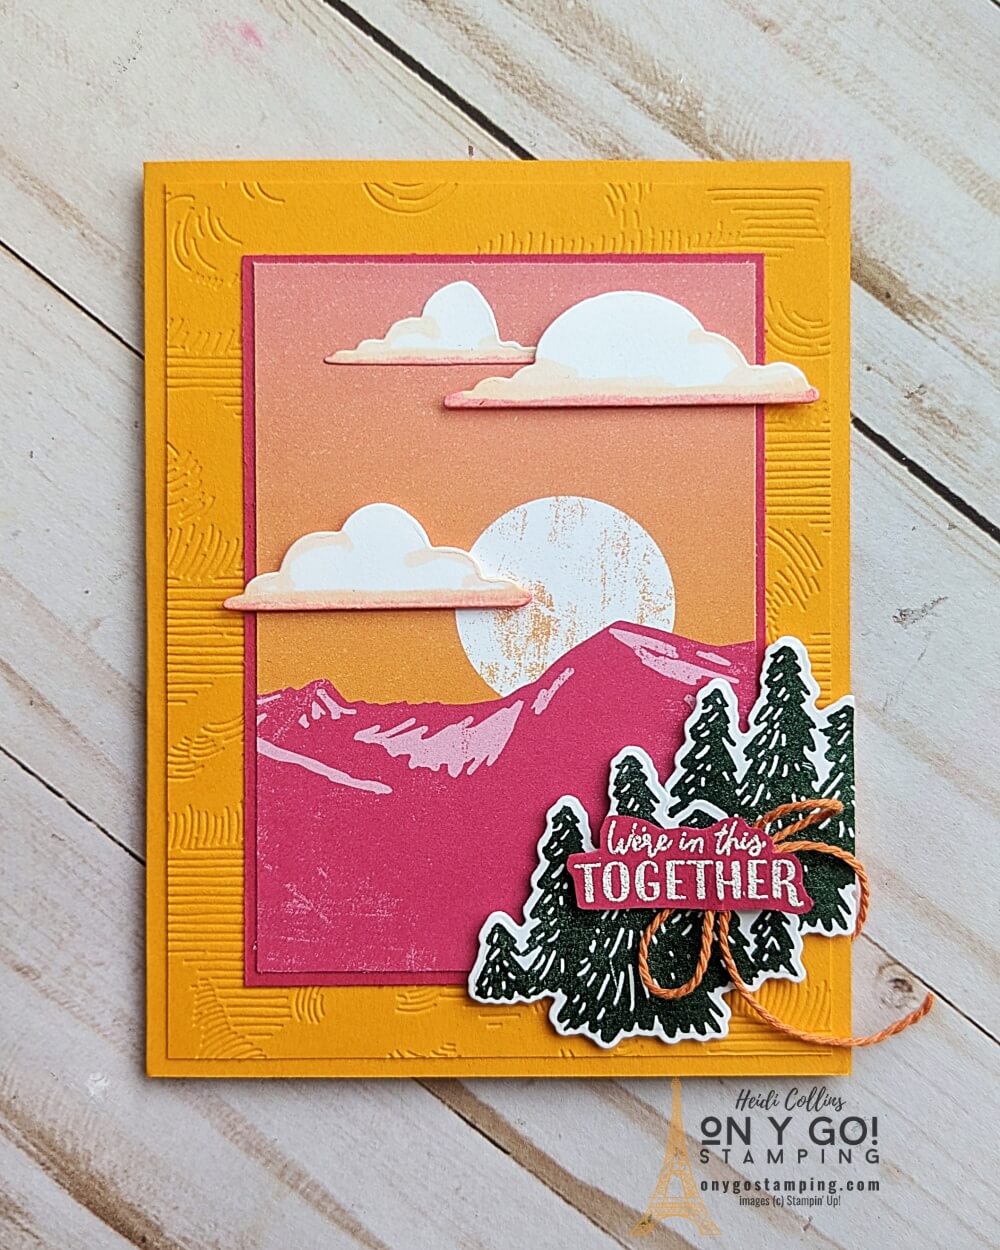 Are you looking for the perfect way to express your heartfelt sentiments? Look no further than the Enjoy the Journey Suite and Greatest Journey stamp set from Stampin' Up!, and make your own handmade card! With vivid patterned paper and simple step-by-step instructions provided, you will be able to produce a card that is sure to bring a warm smile to the receiver's face. And during Sale-A-Bration 2023, get the patterned paper FREE with your purchase!